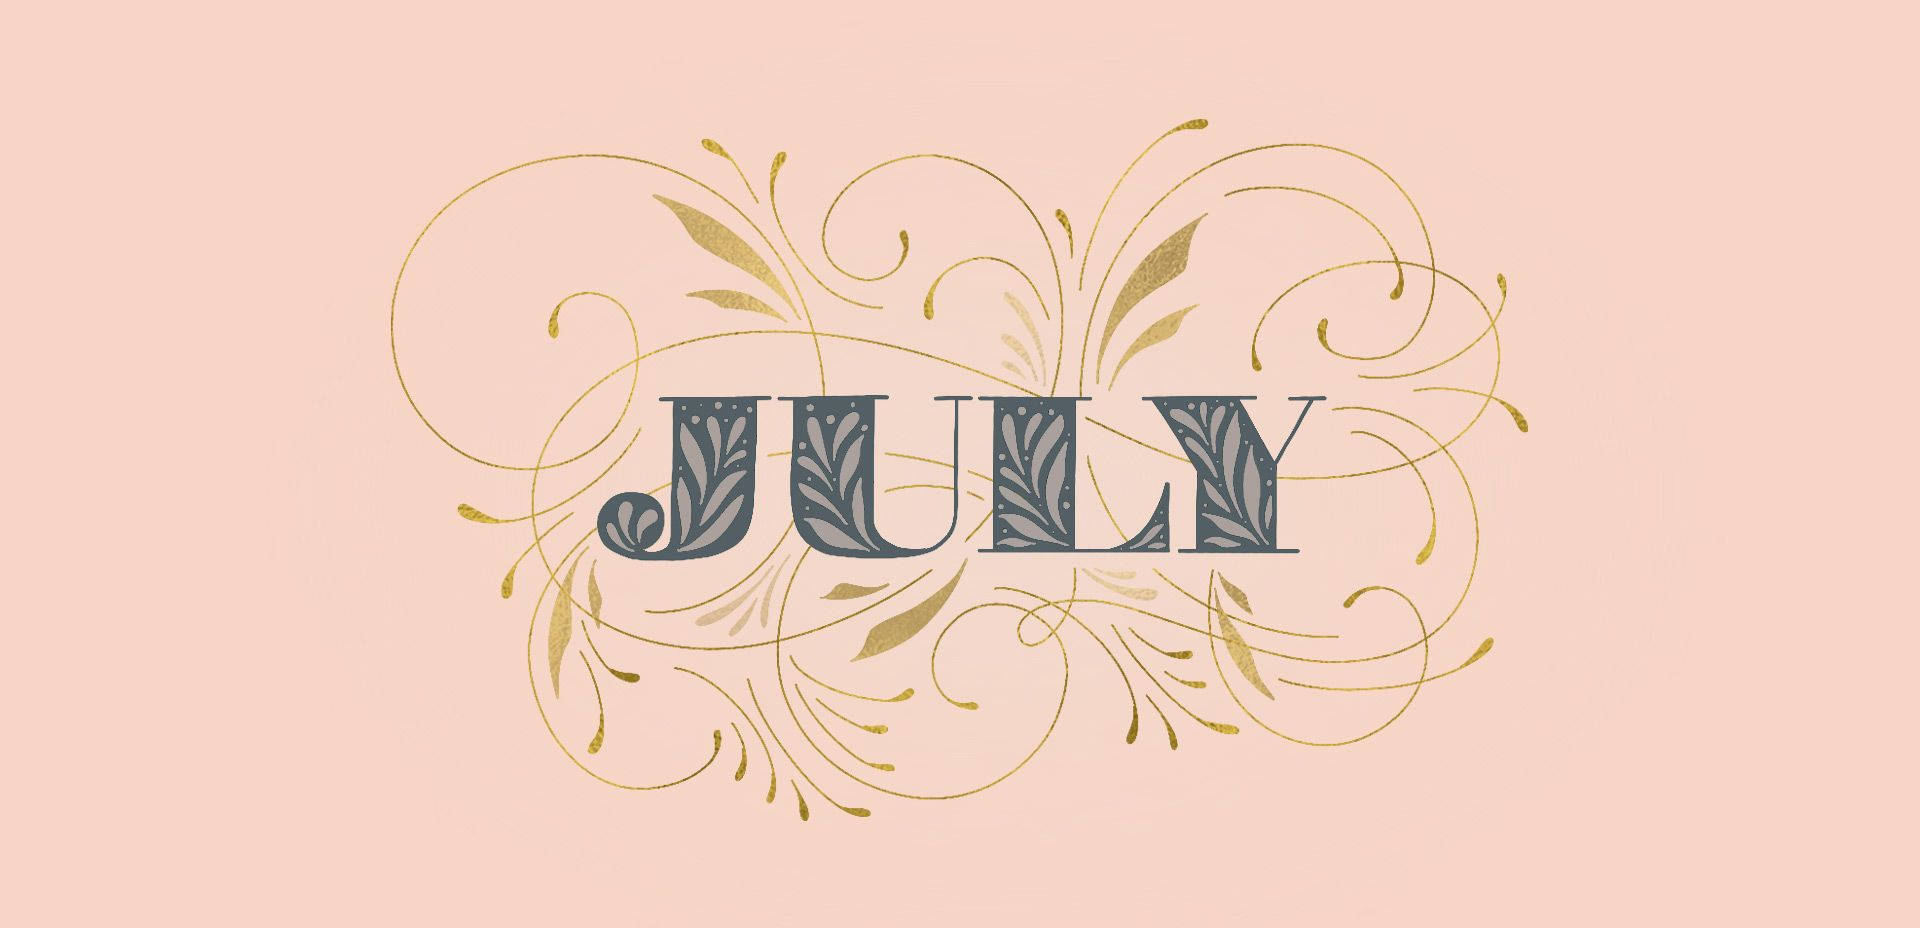 July is full of vibrant colors and beautiful surprises. Wallpaper